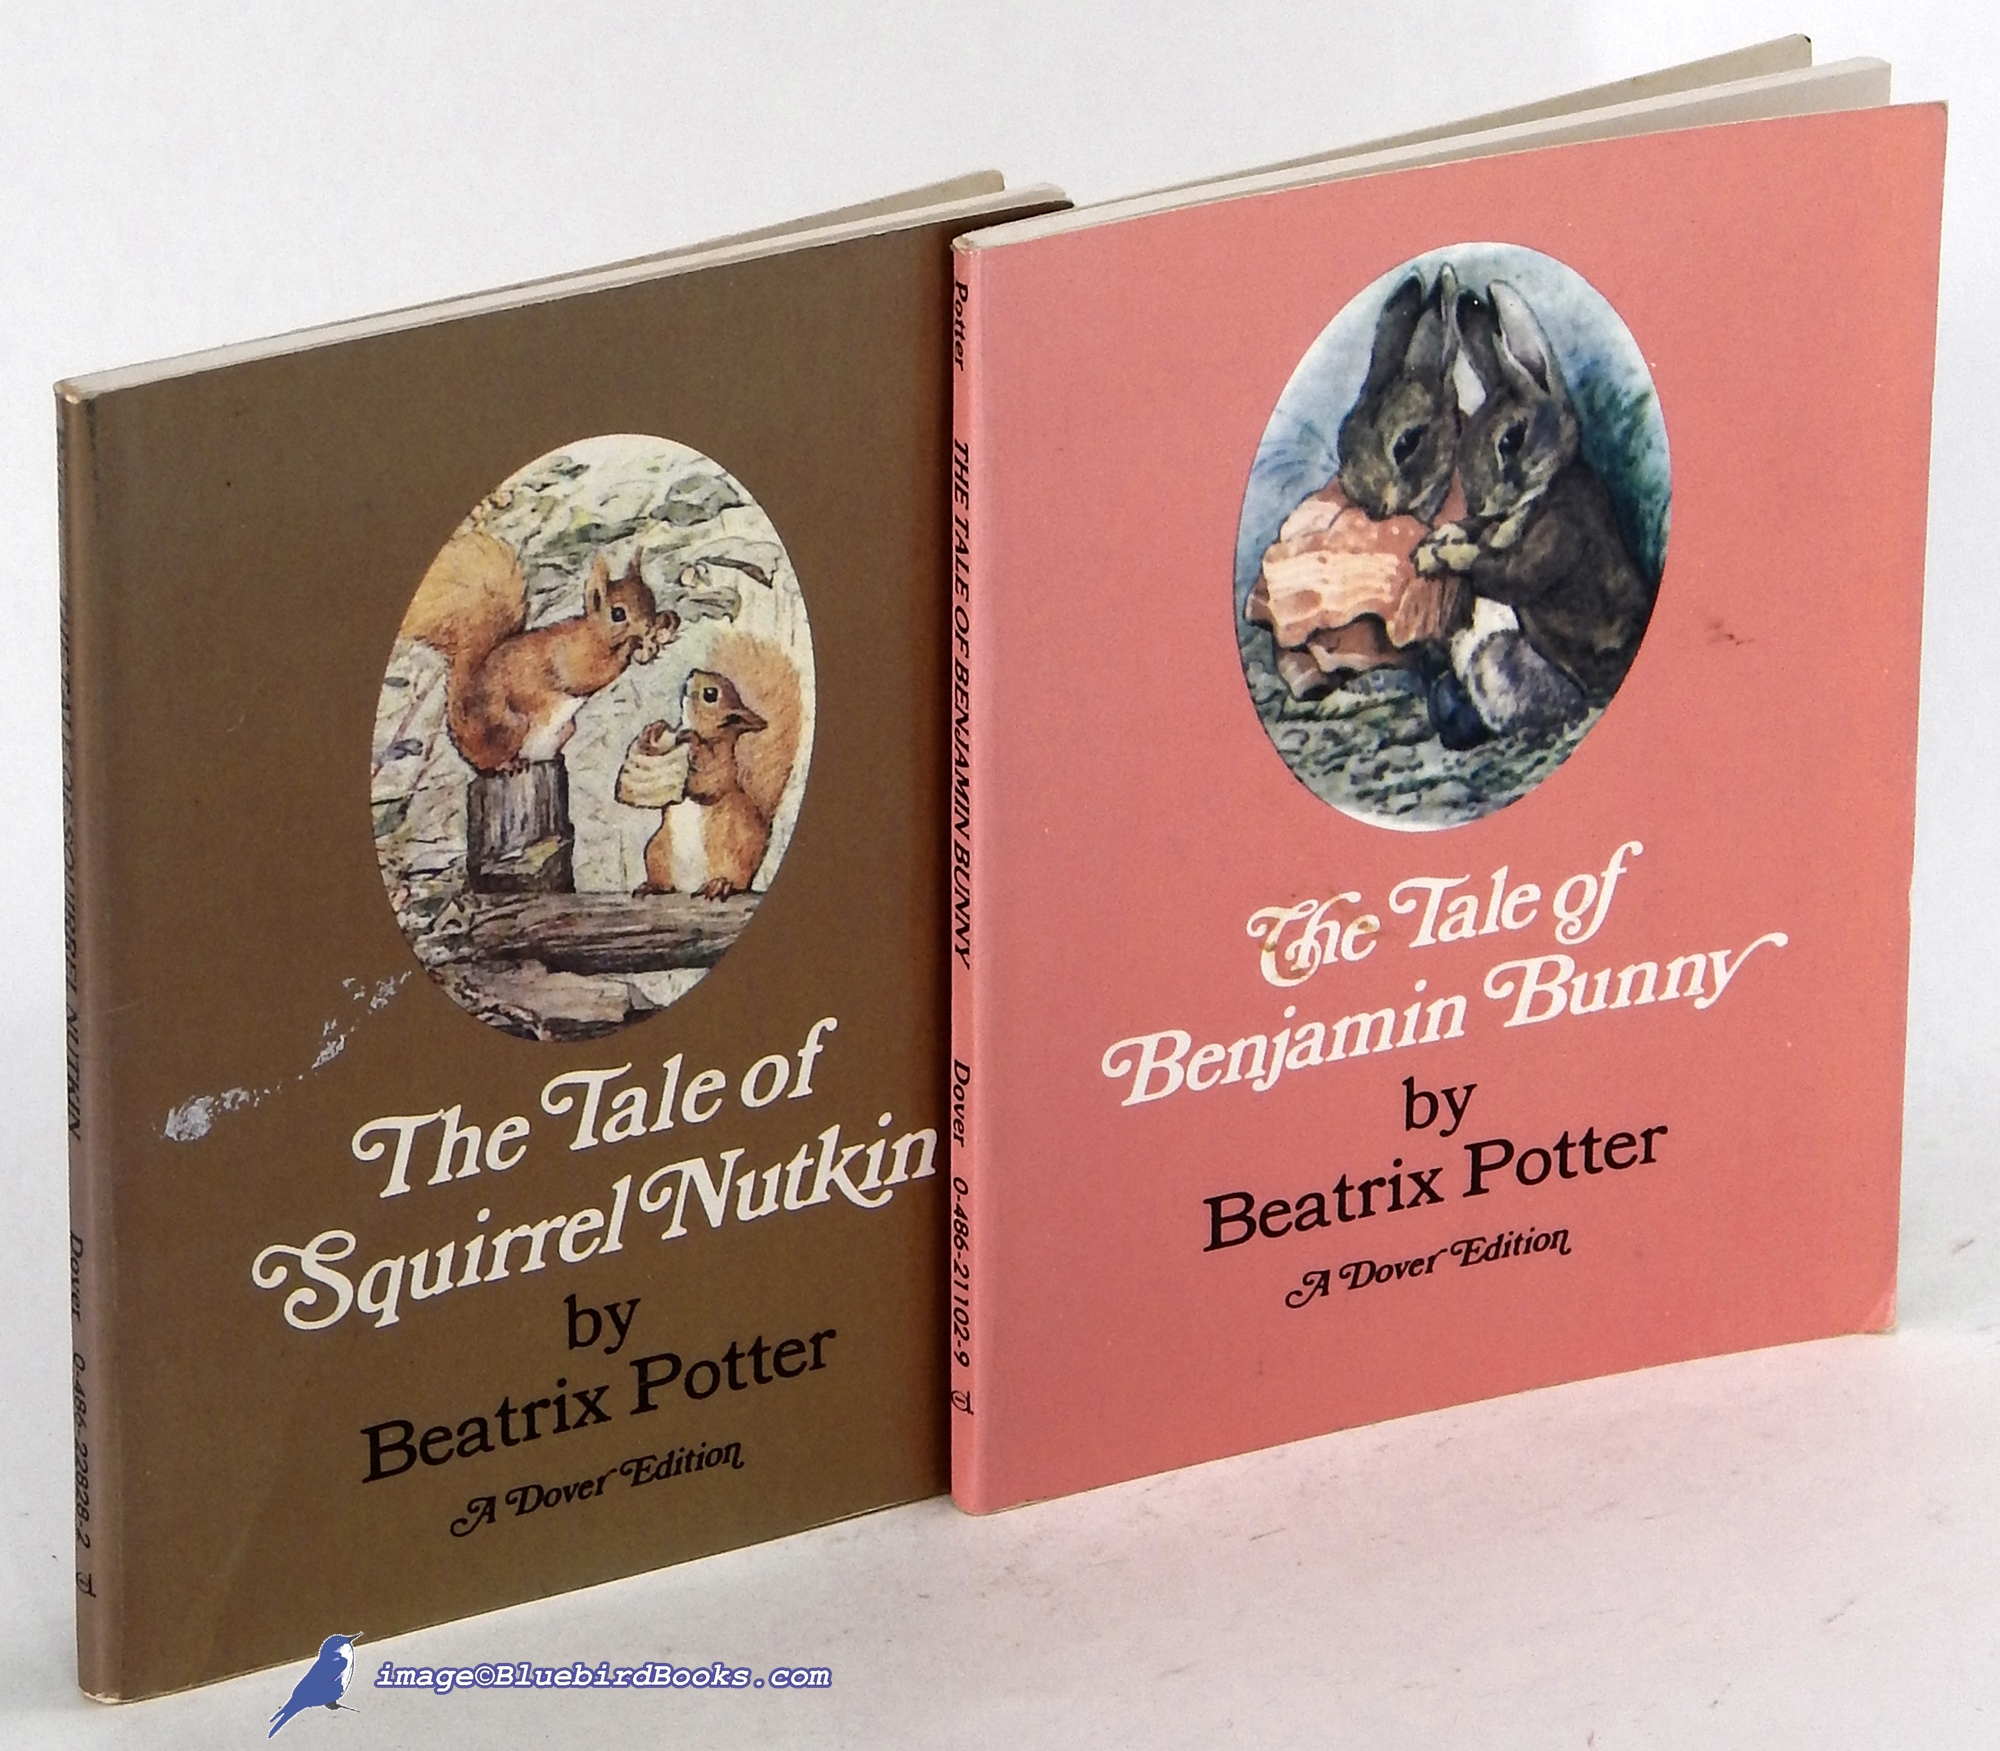 POTTER, BEATRIX - The Tale of Squirrel Nutkin -and- the Tale of Benjamin Bunny